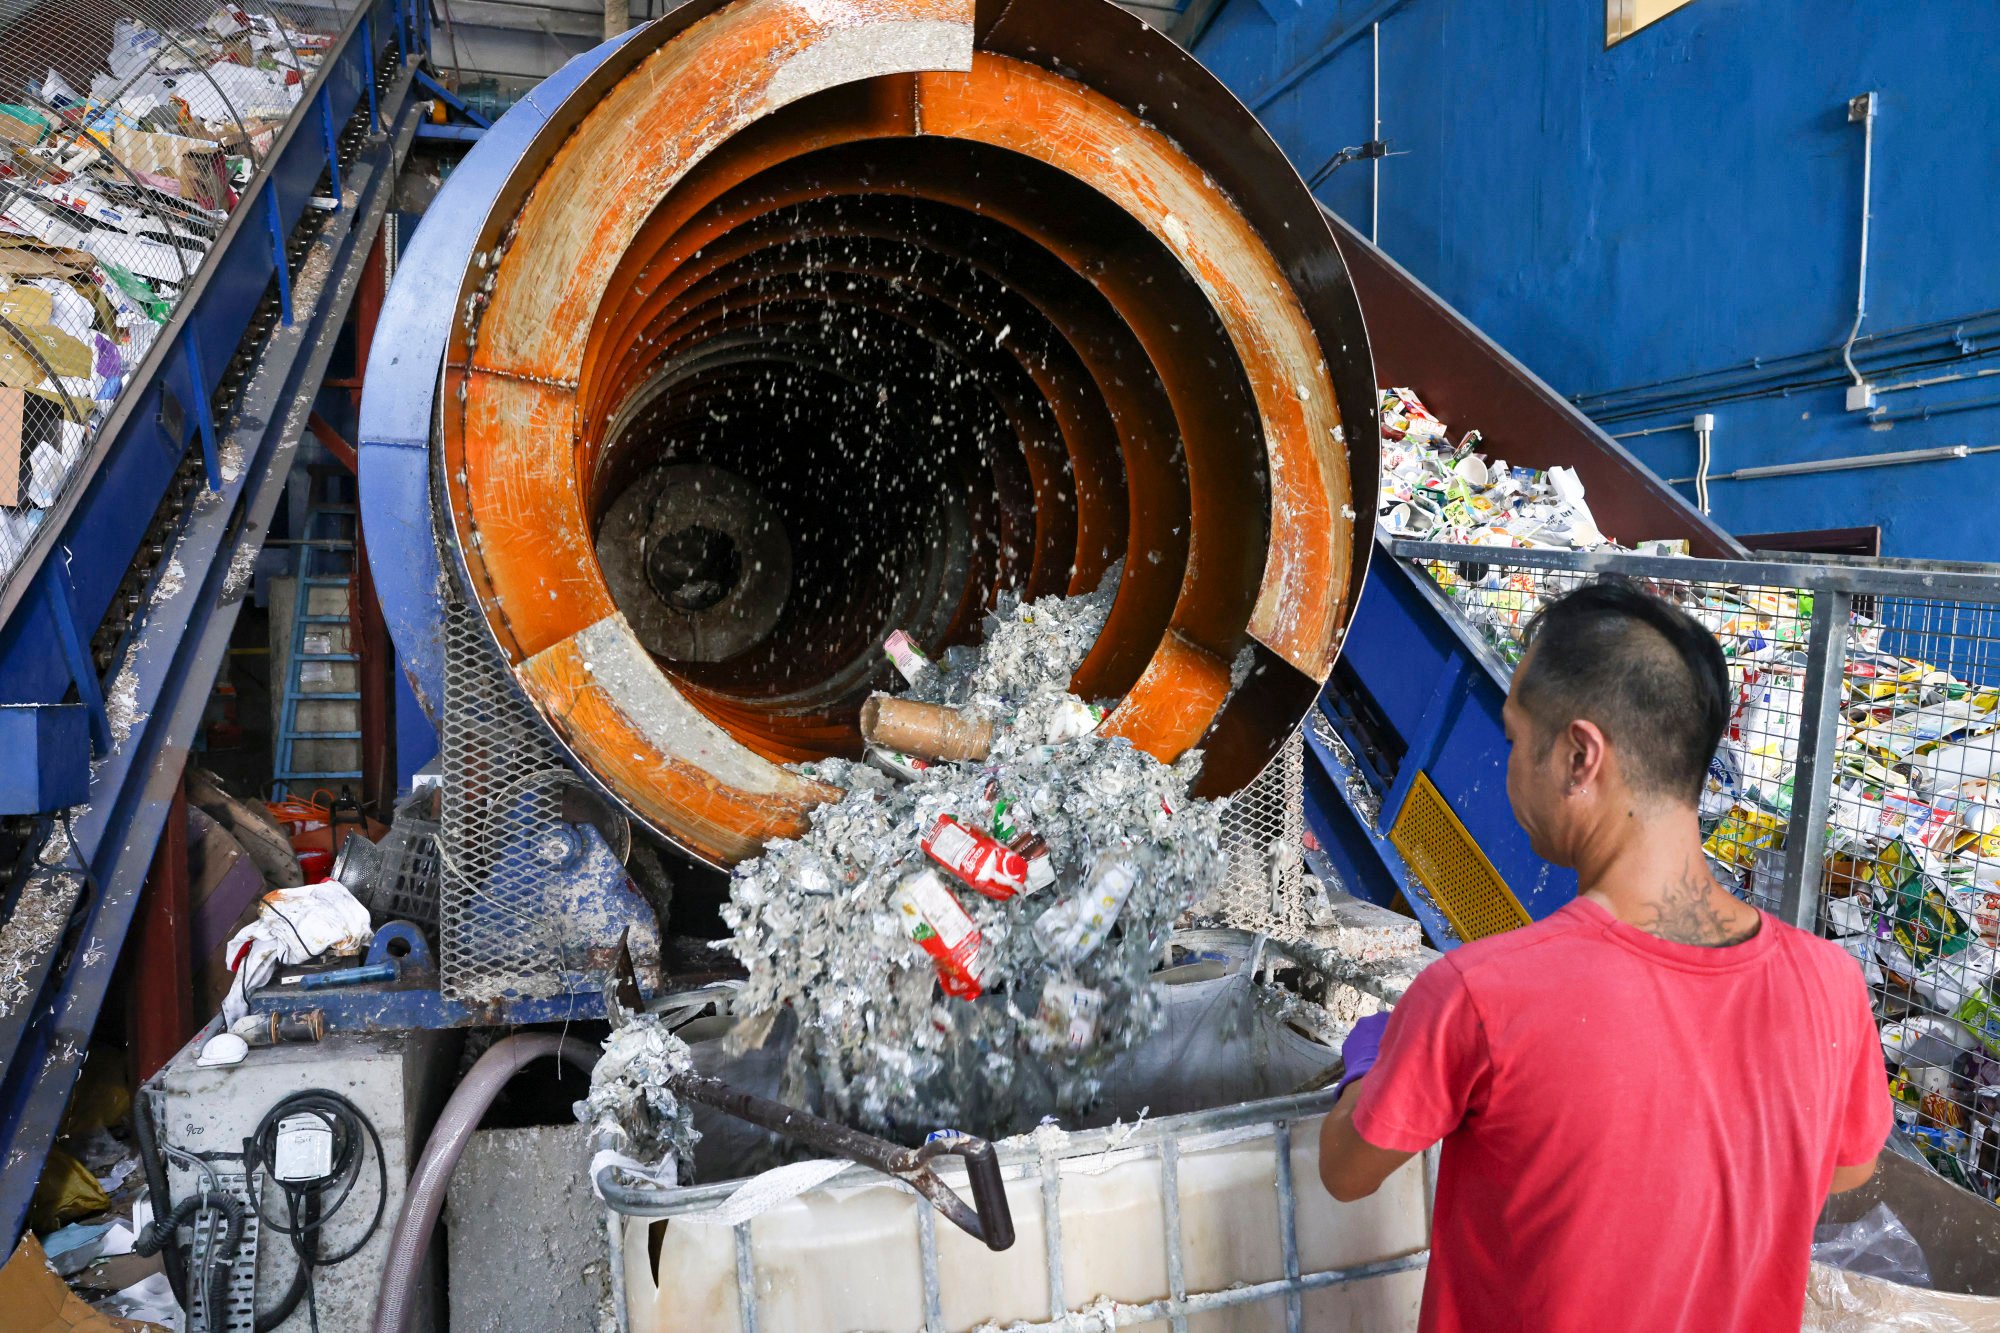 A worker at Mil Mill operates a recycling machine that converts drinks cartons and other paper waste into products such as cardboard, building materials and cat litter. Photo: K. Y. Cheng